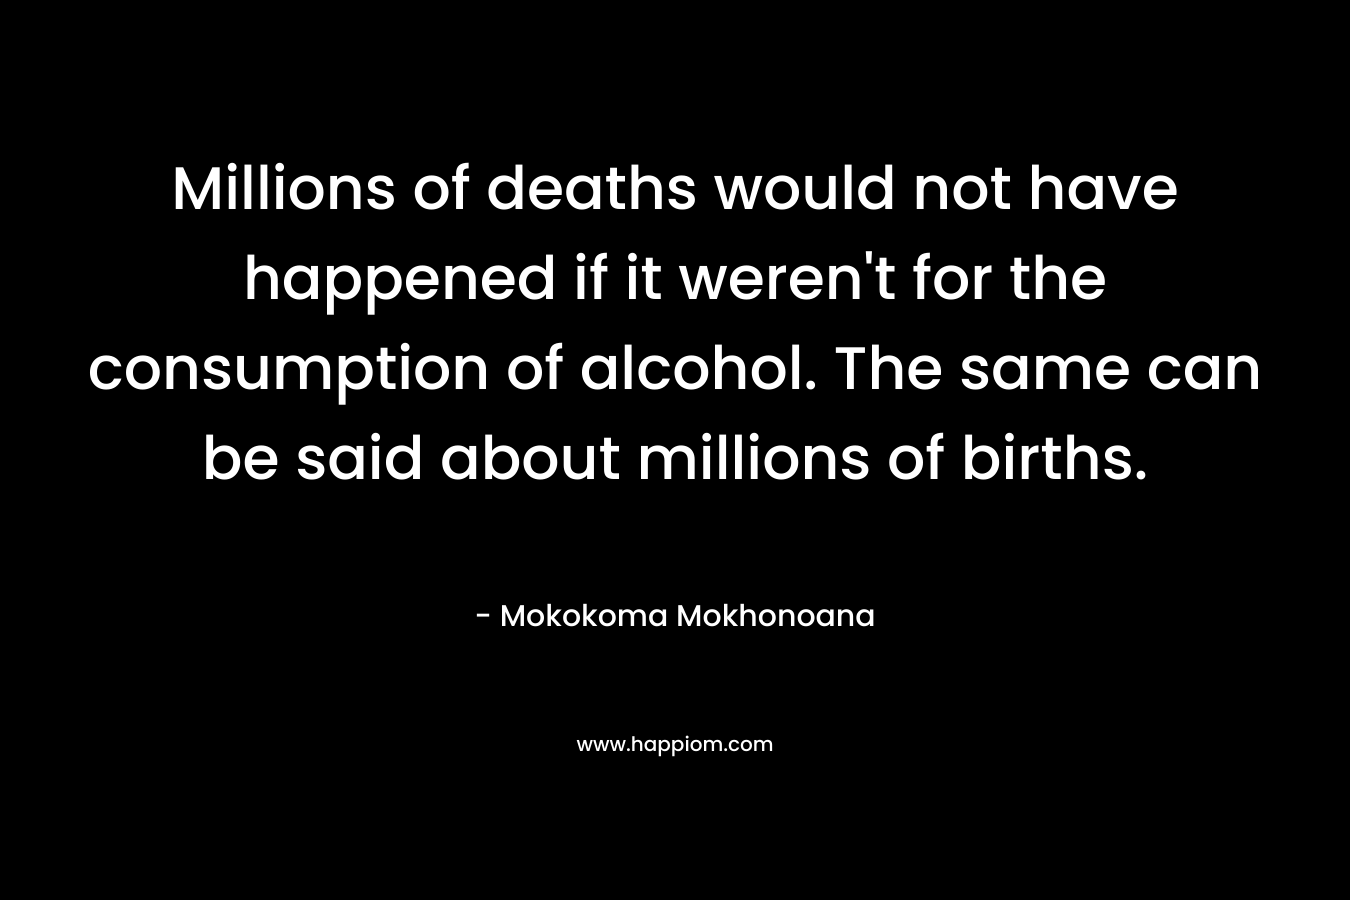 Millions of deaths would not have happened if it weren’t for the consumption of alcohol. The same can be said about millions of births. – Mokokoma Mokhonoana